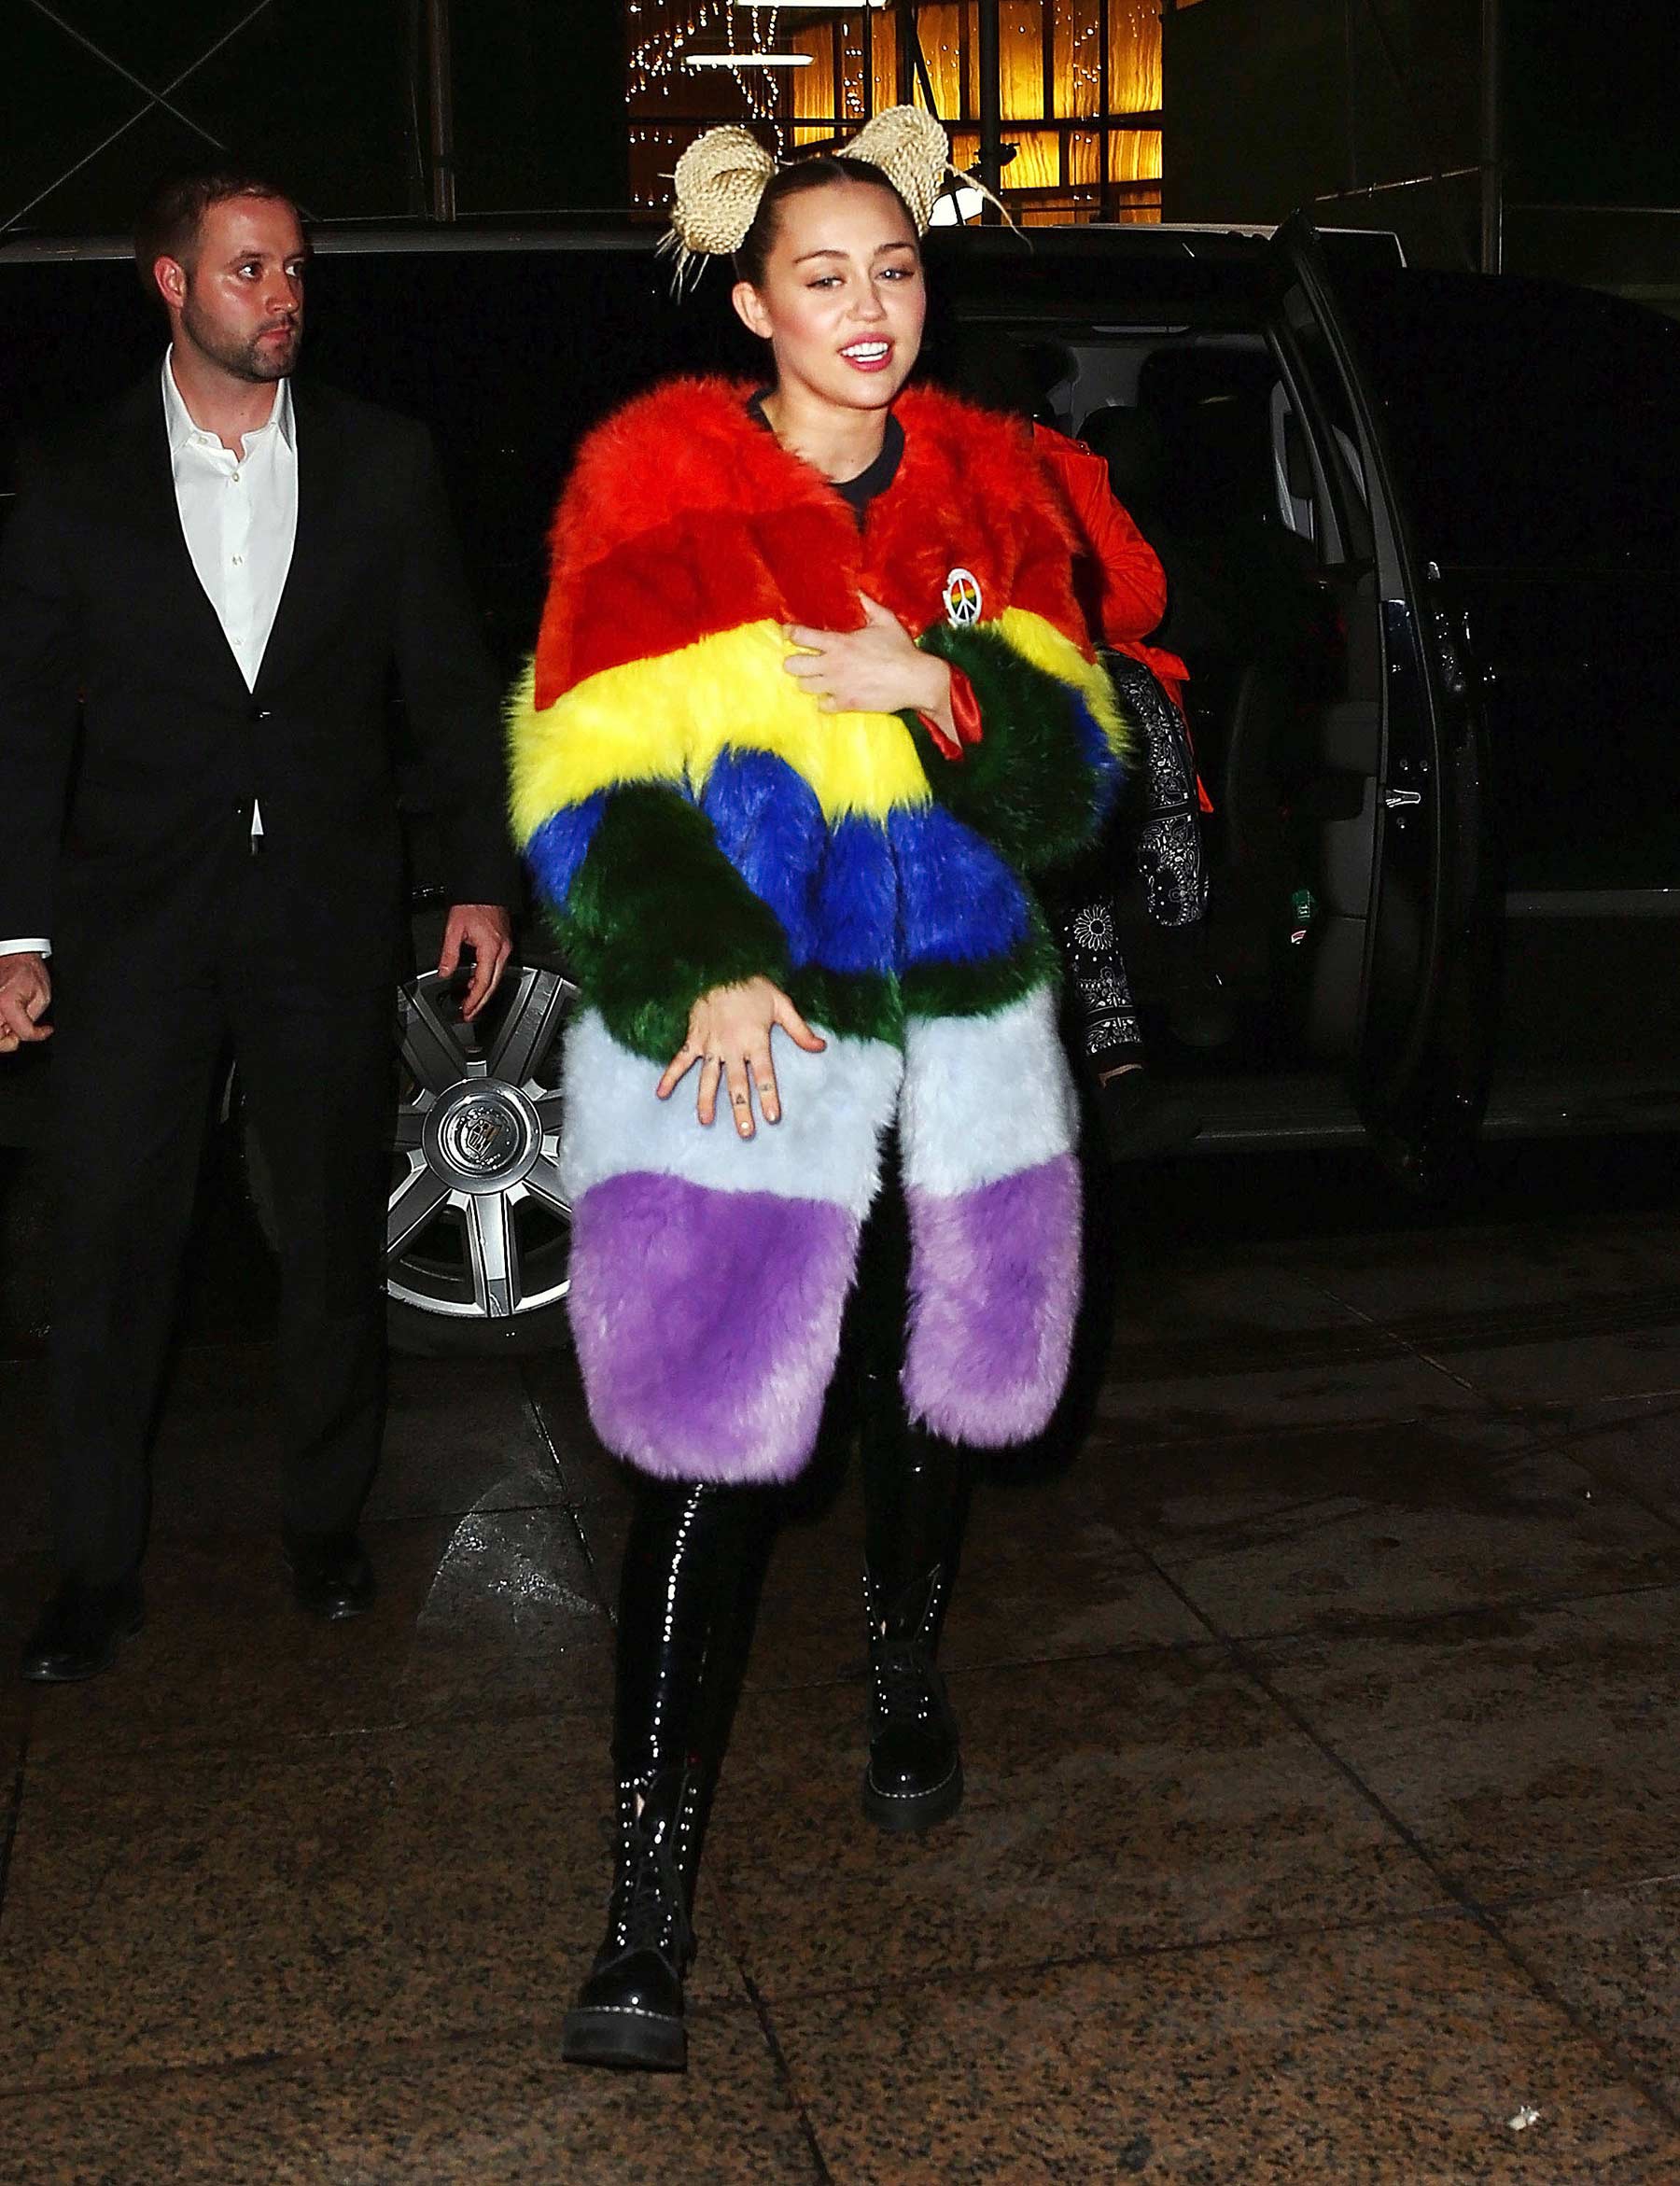 Miley Cyrus sighted in New York City